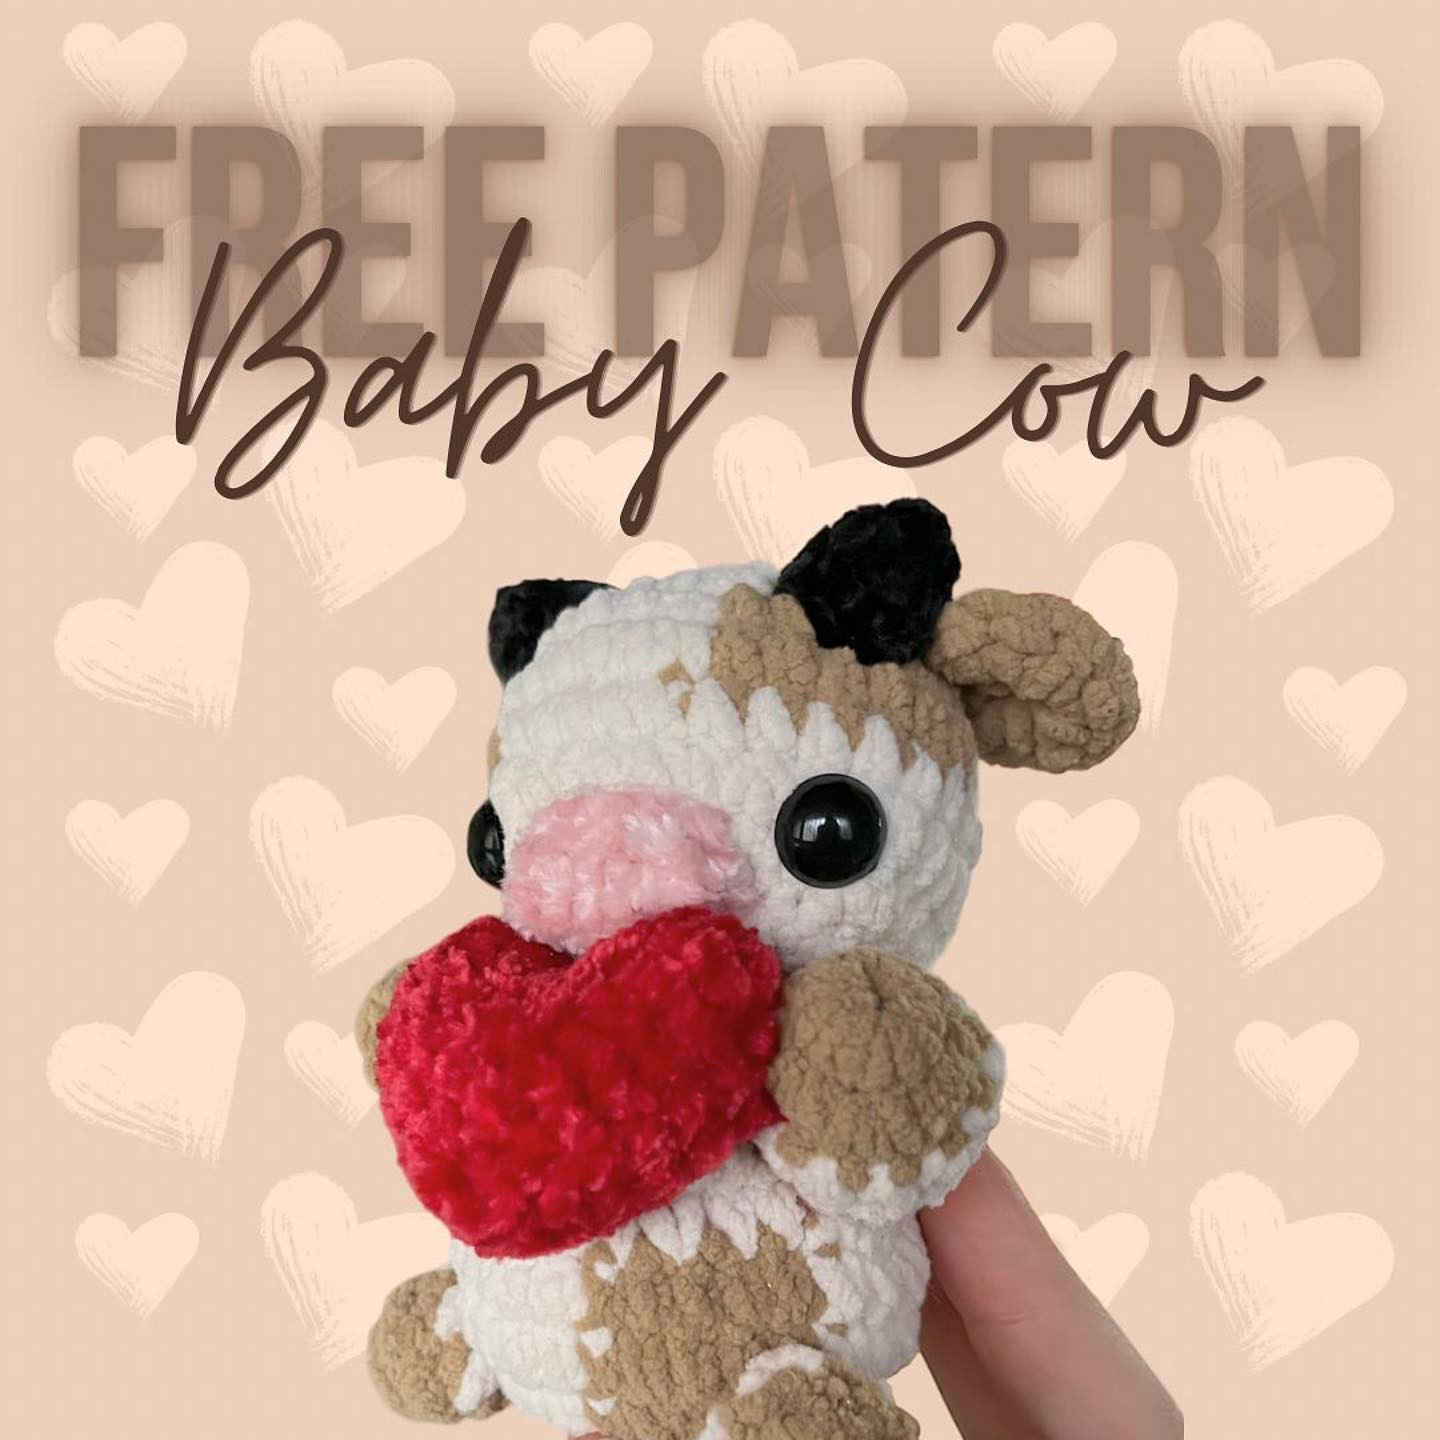 free pattern baby cow